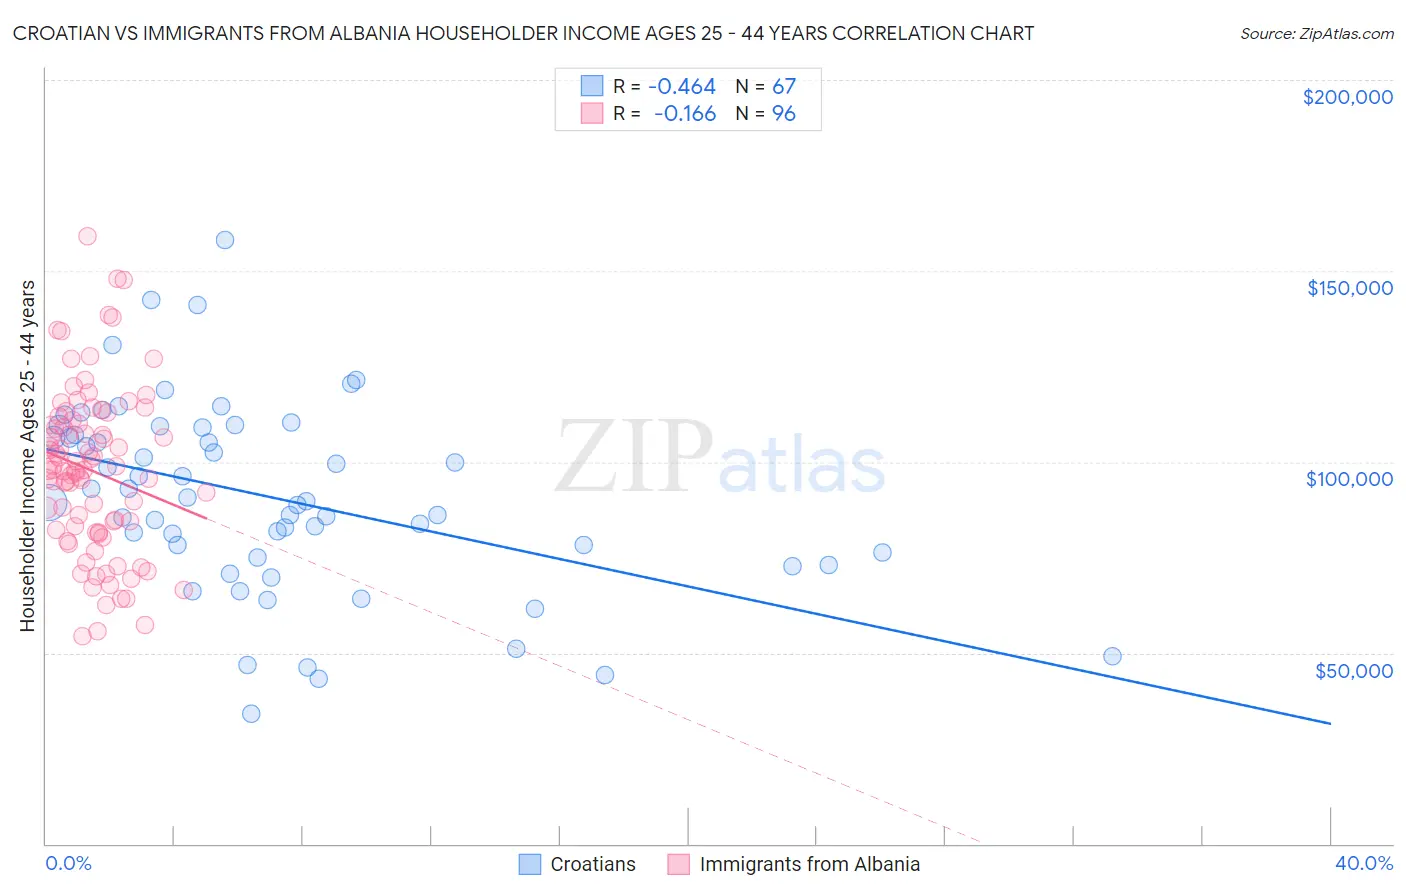 Croatian vs Immigrants from Albania Householder Income Ages 25 - 44 years